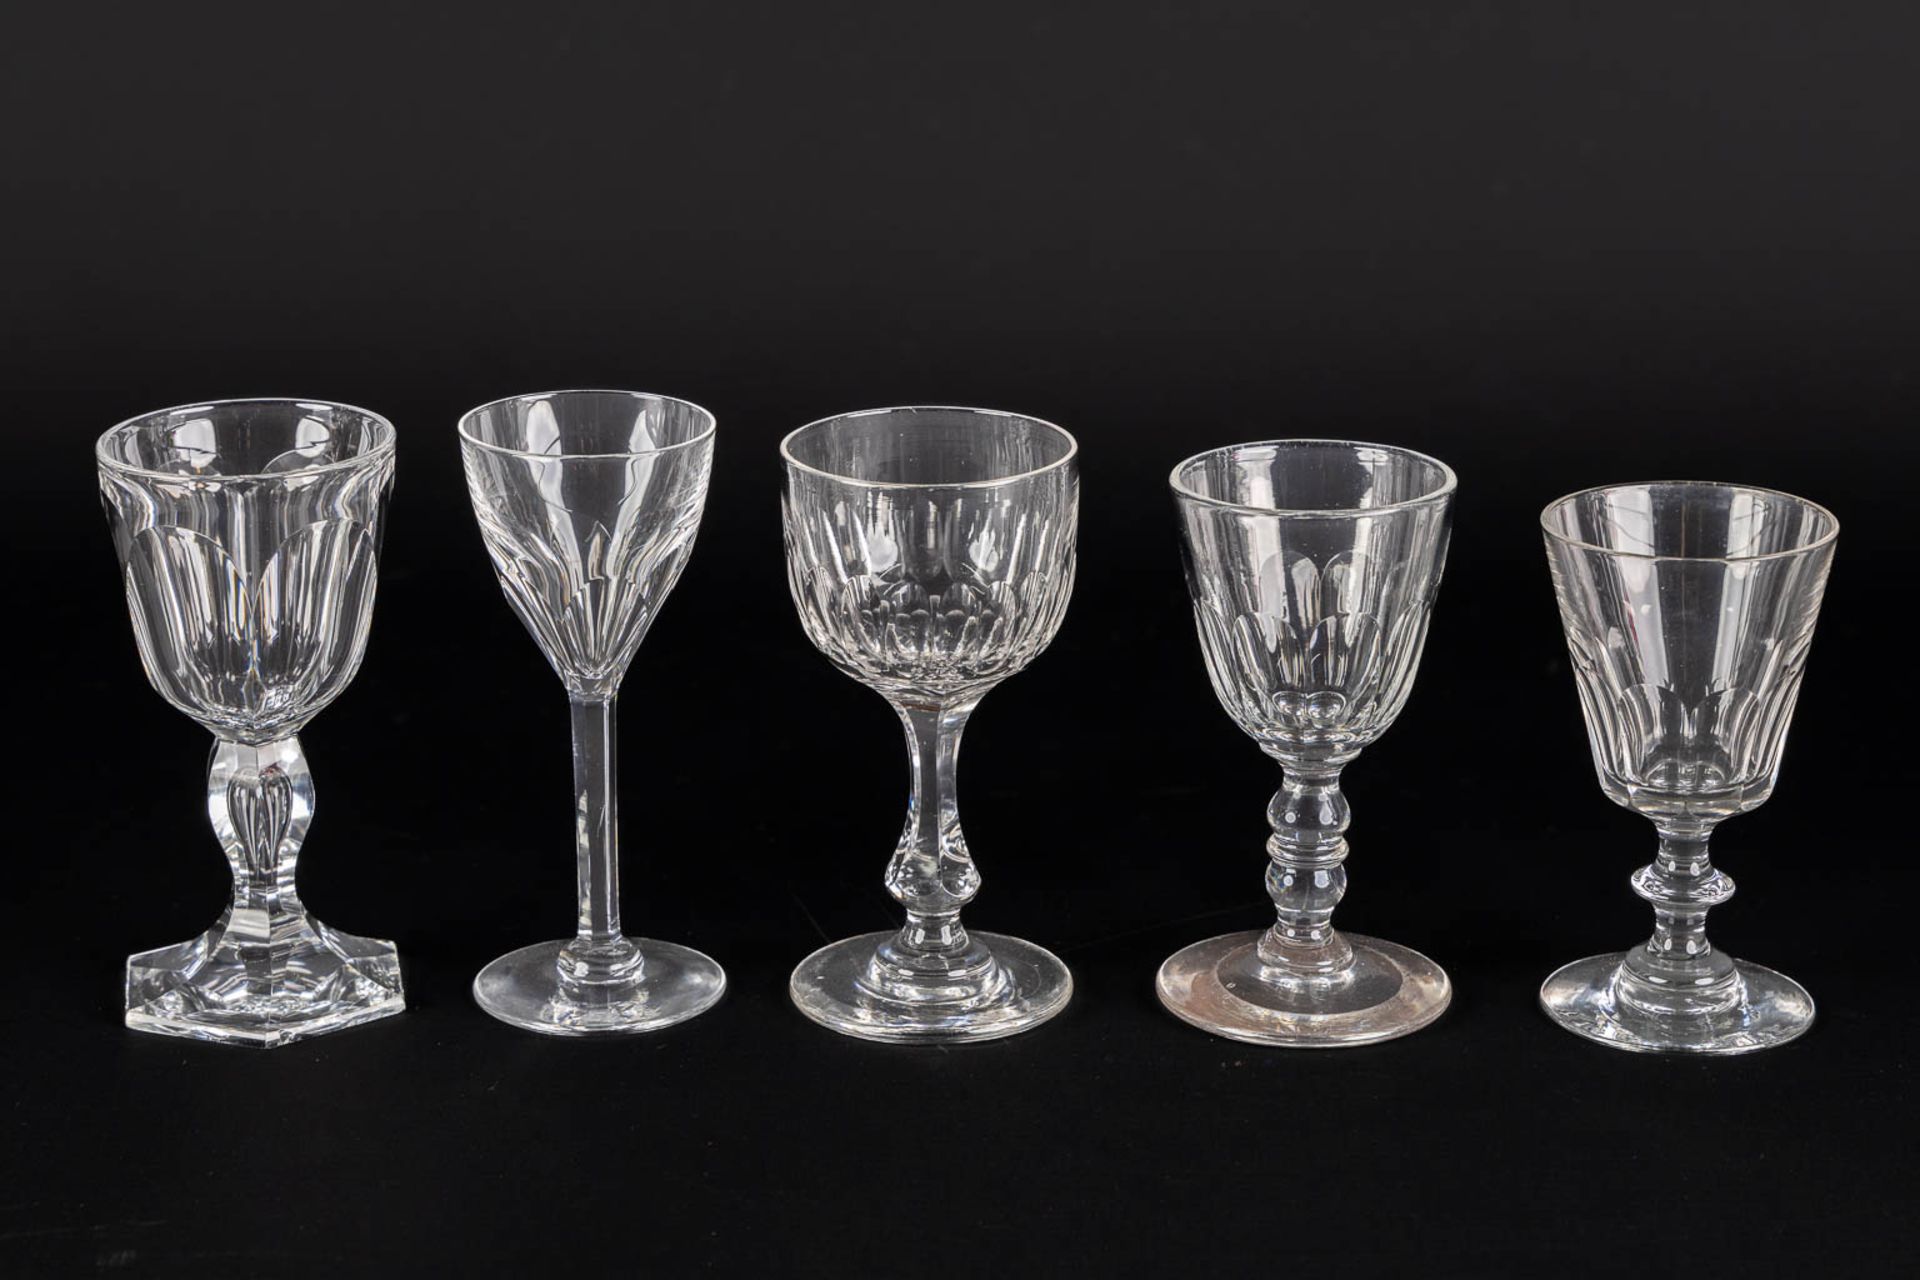 Val Saint Lambert, 'Gevaert' a large collection of coloured and cut crystal goblets. (H:19,1 cm) - Image 5 of 10